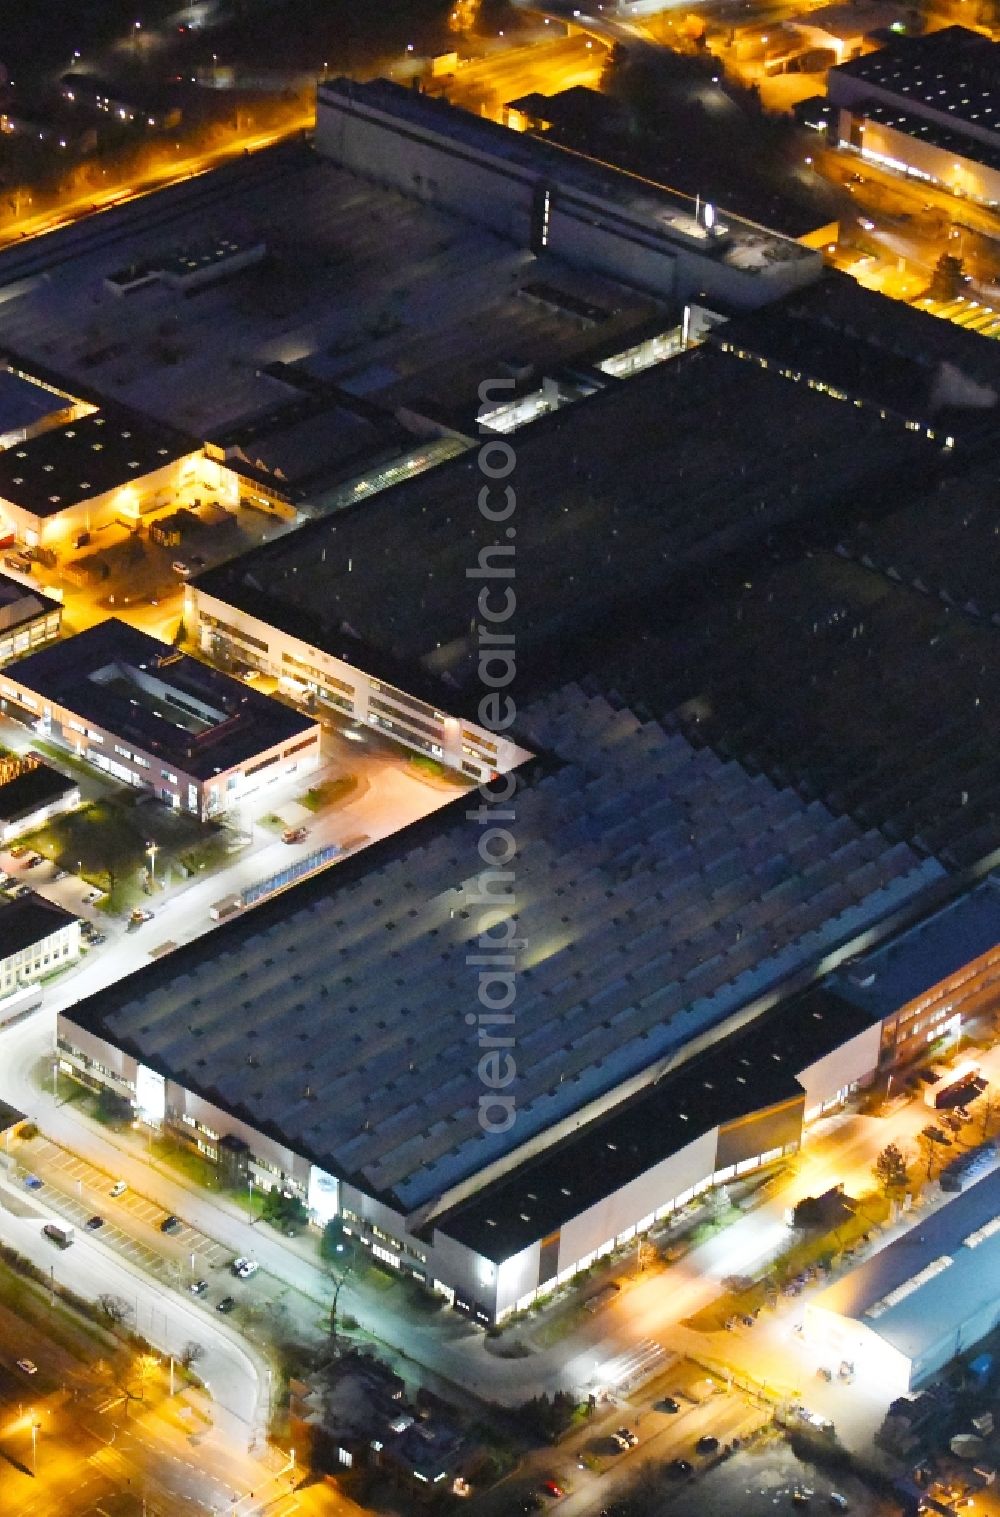 Braunschweig at night from the bird perspective: Night lighting Building and production halls on the premises of VW Volkswagen AG in Braunschweig in the state Lower Saxony